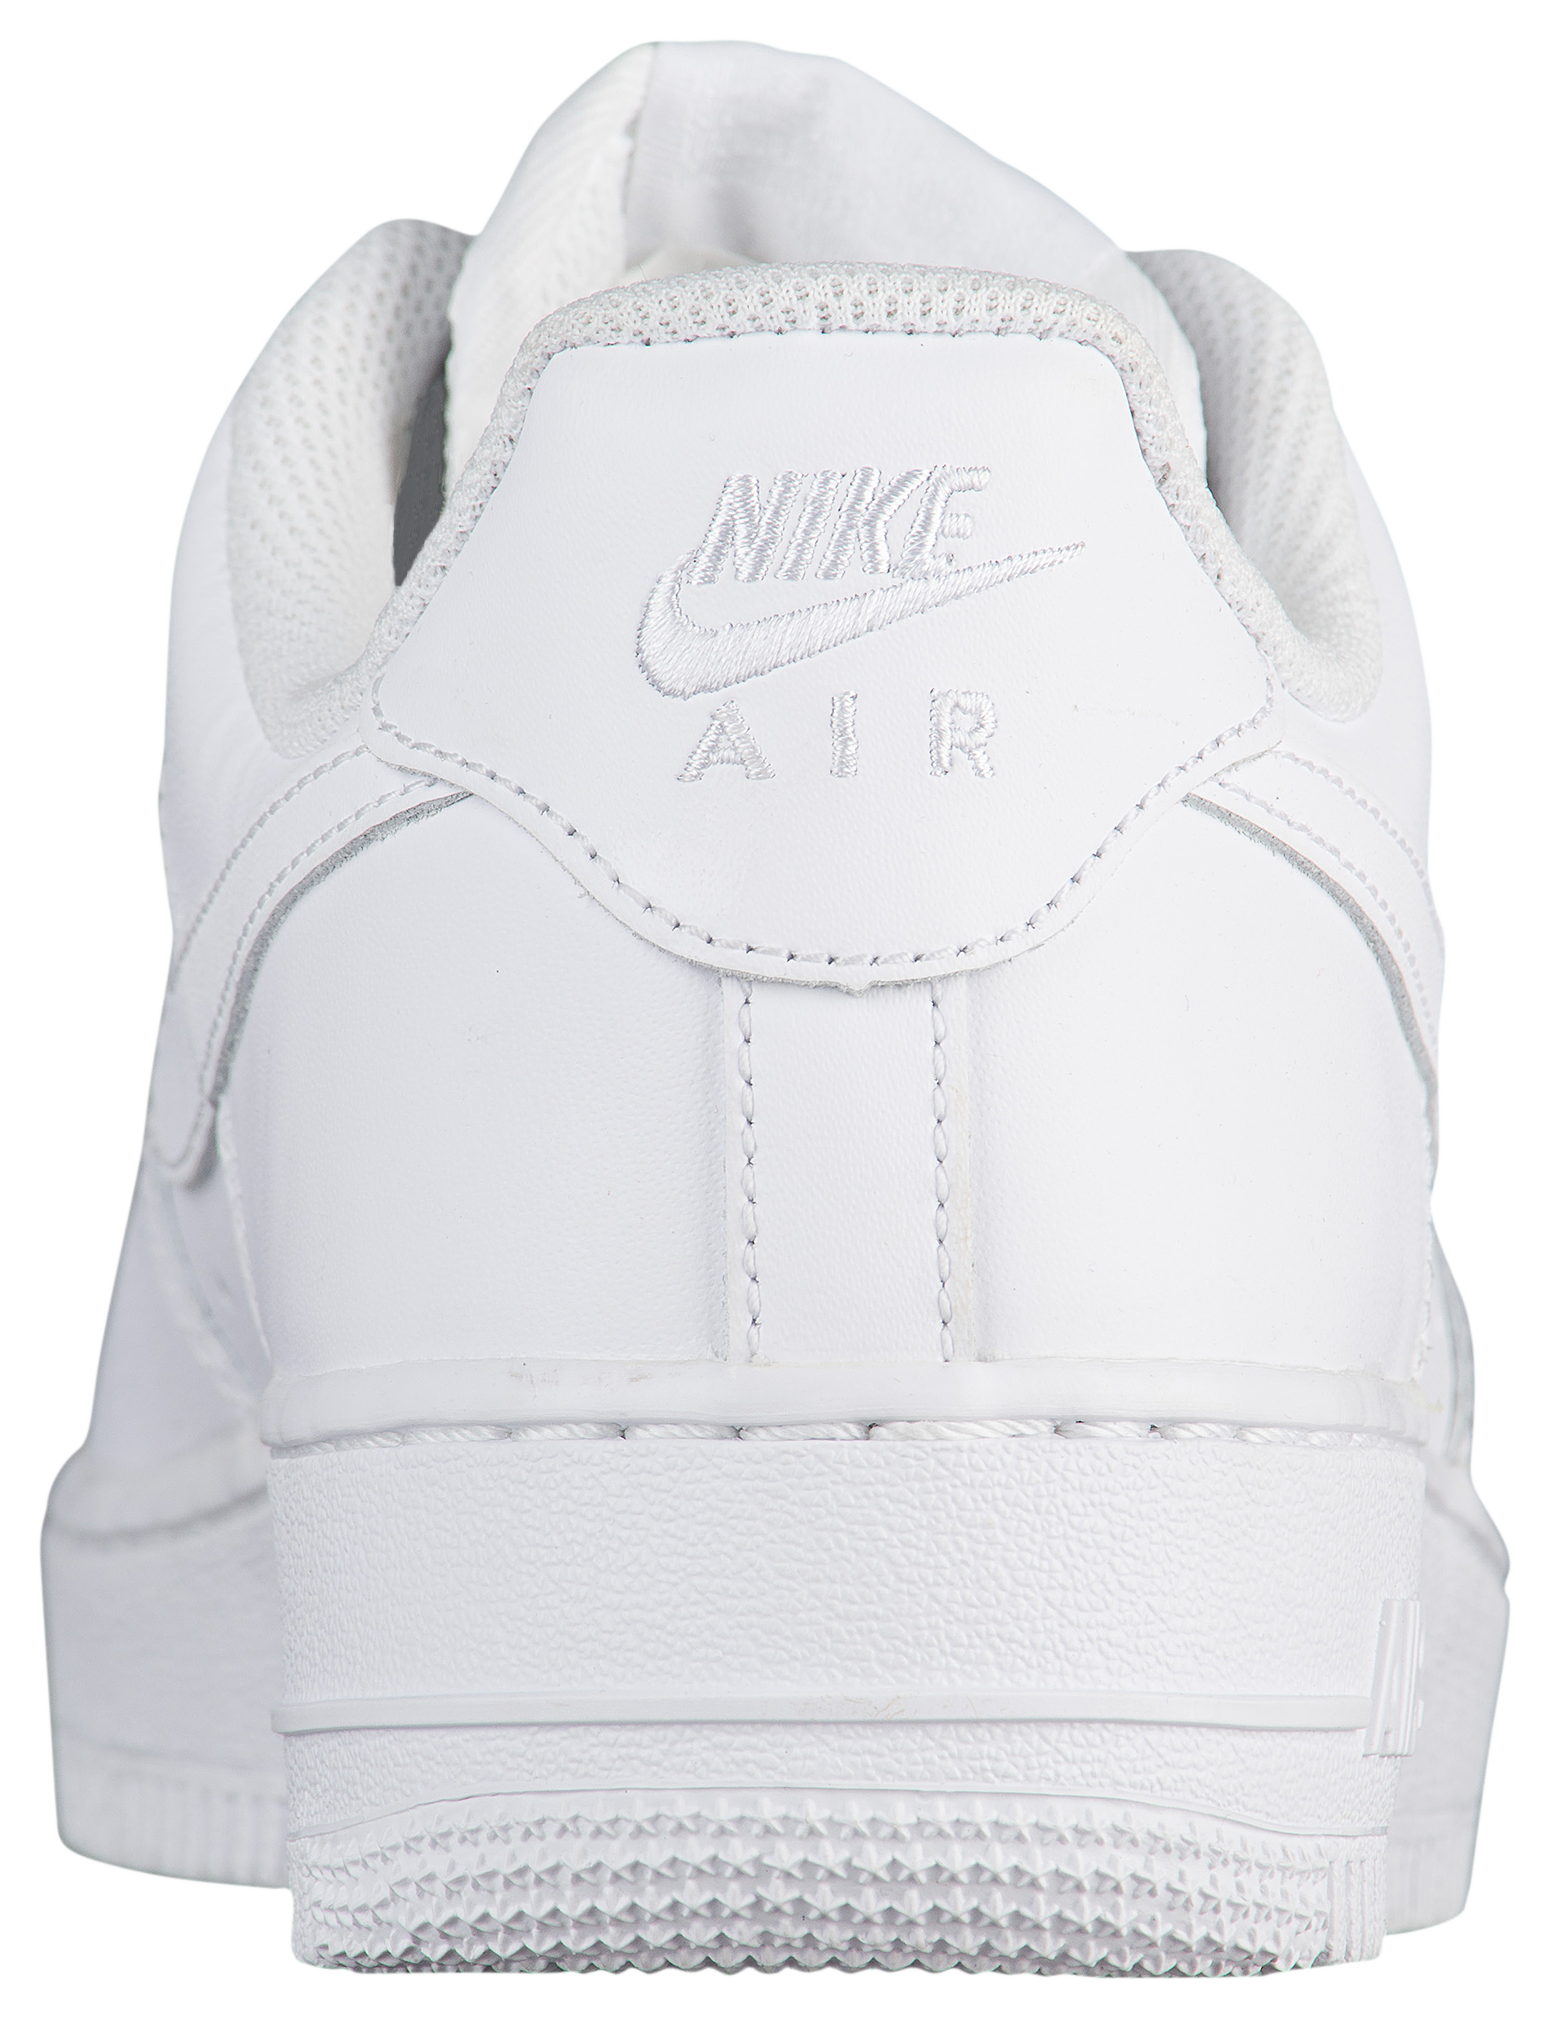 womens air force 1 07 le low